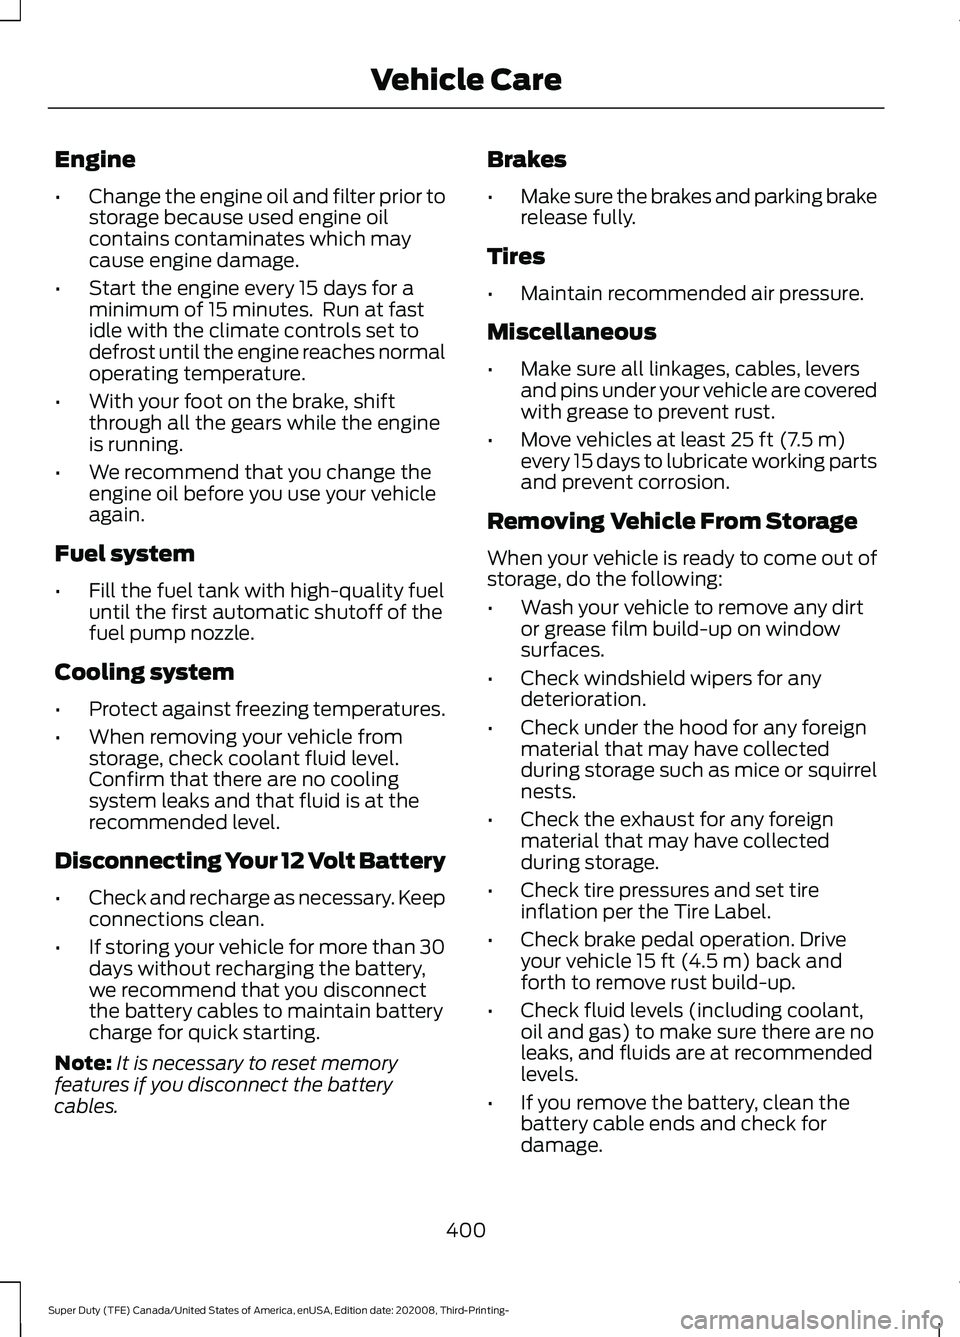 FORD F-450 2021  Owners Manual Engine
•
Change the engine oil and filter prior to
storage because used engine oil
contains contaminates which may
cause engine damage.
• Start the engine every 15 days for a
minimum of 15 minutes